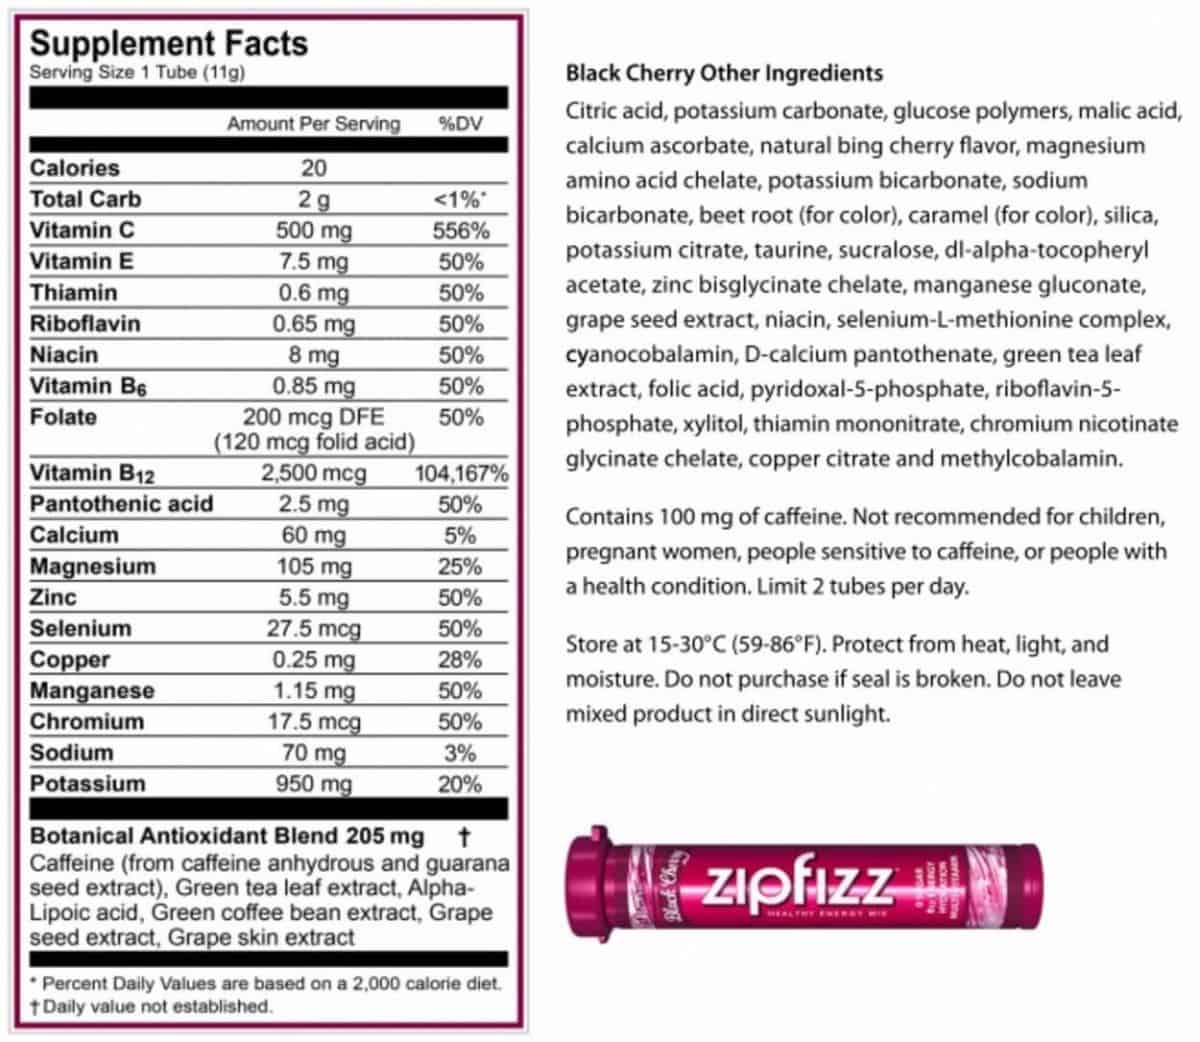 Zipfizz nutrition facts and ingredients